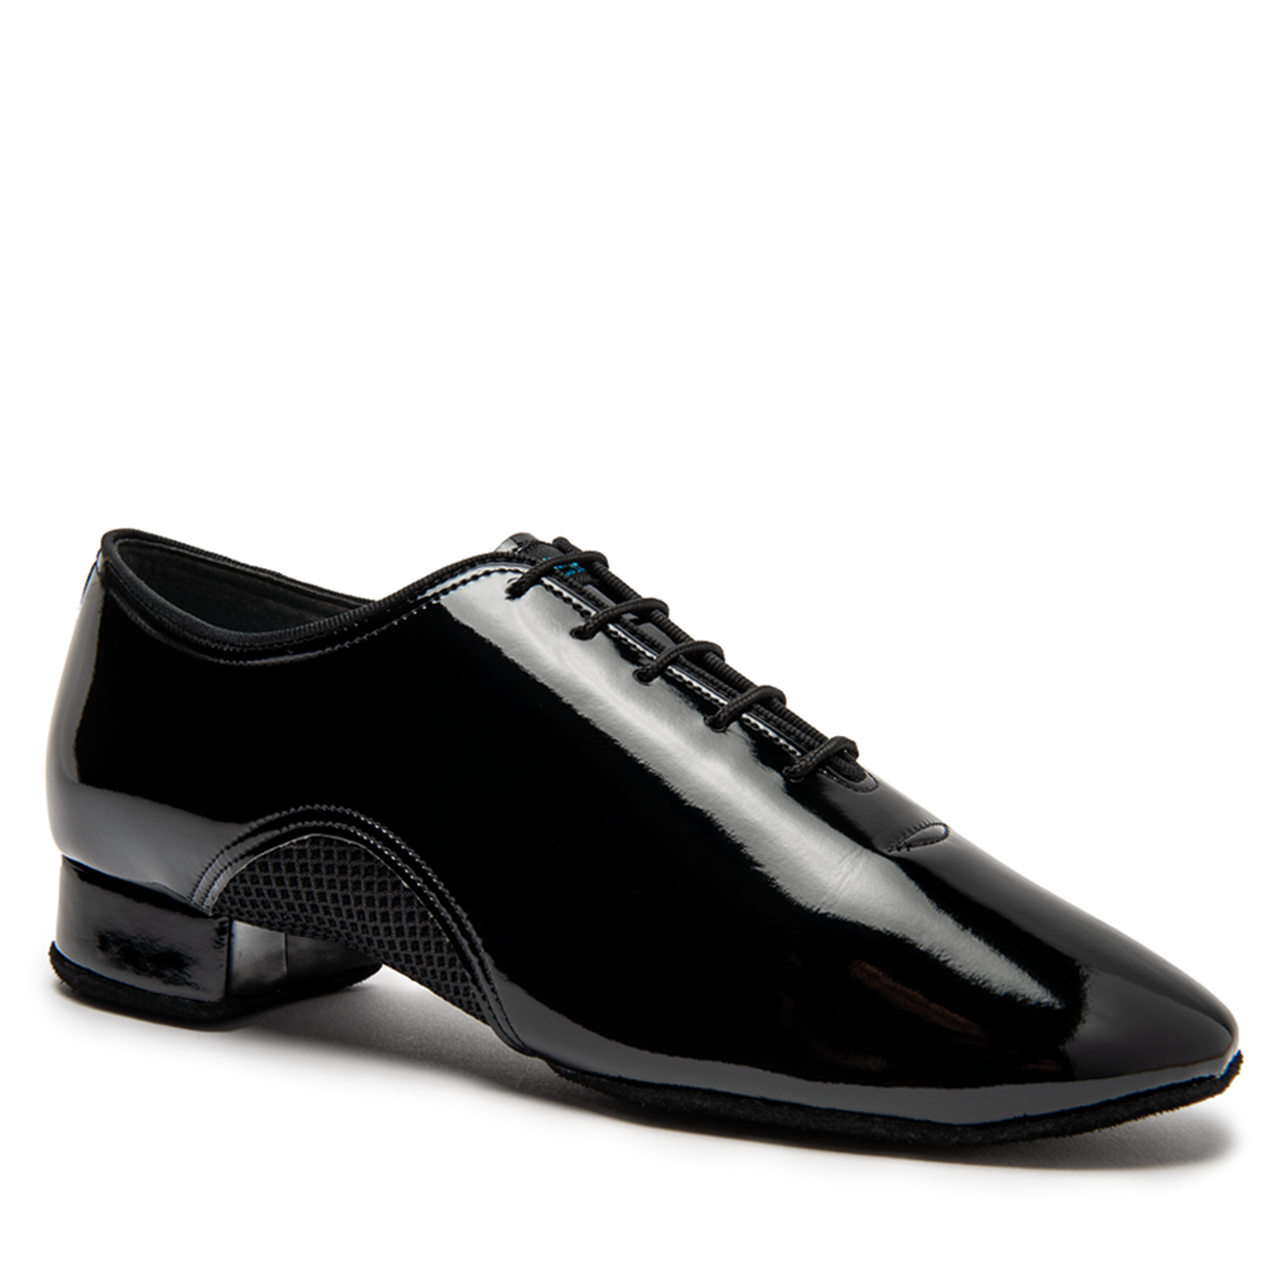 International Dance Shoes IDS Romeo Black Patent Men's Ballroom Shoe with Mesh Inserts and Split Sole